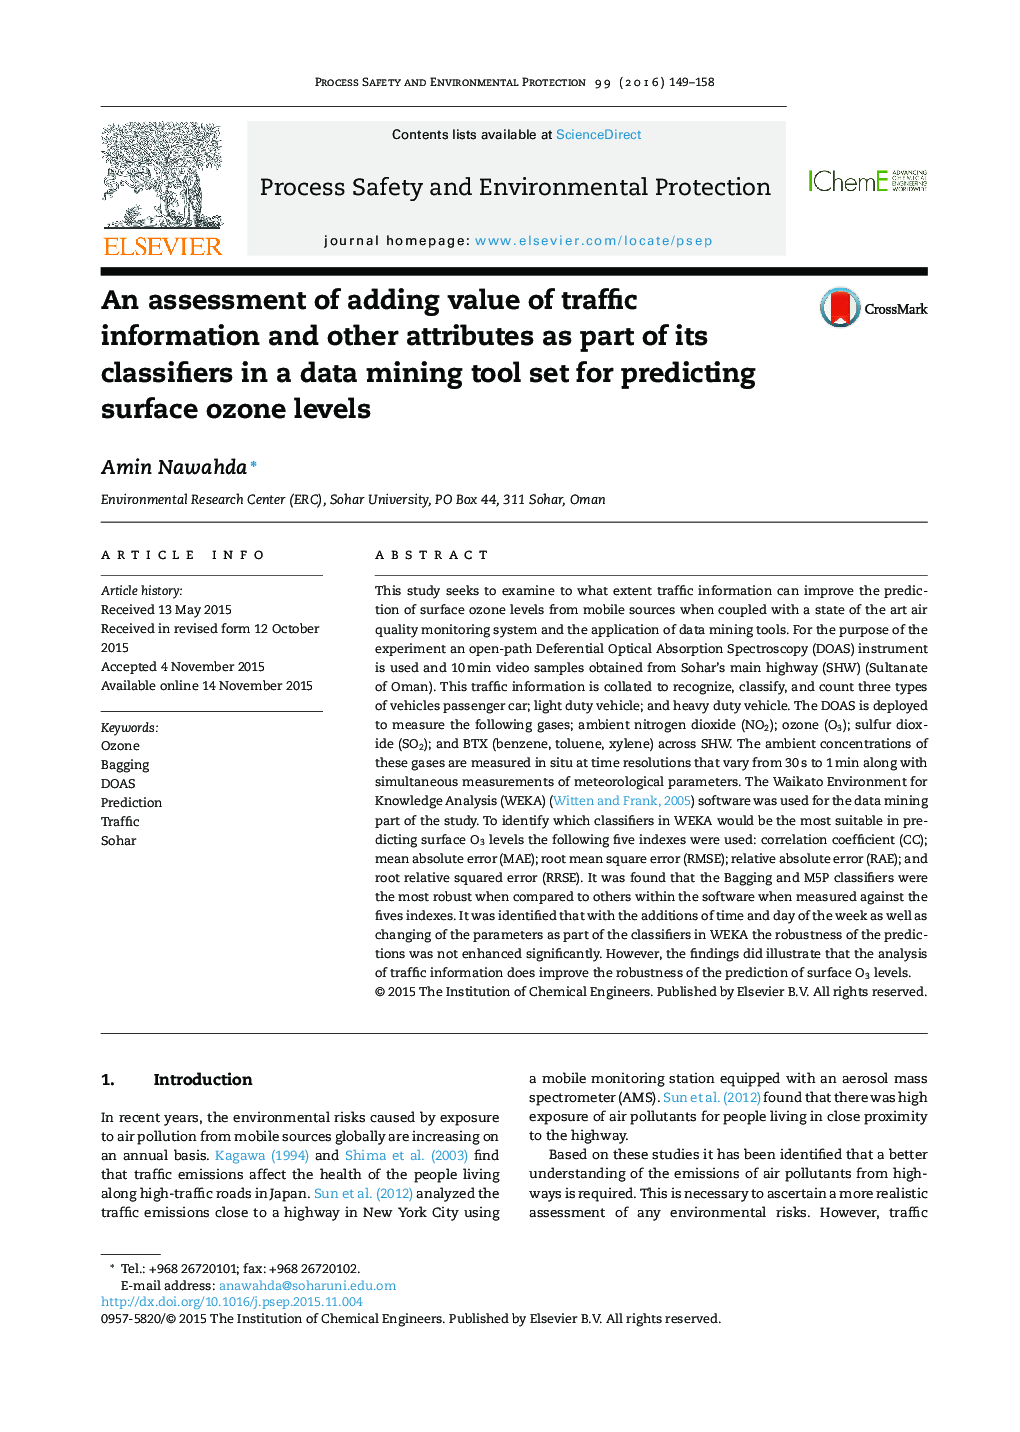 An assessment of adding value of traffic information and other attributes as part of its classifiers in a data mining tool set for predicting surface ozone levels